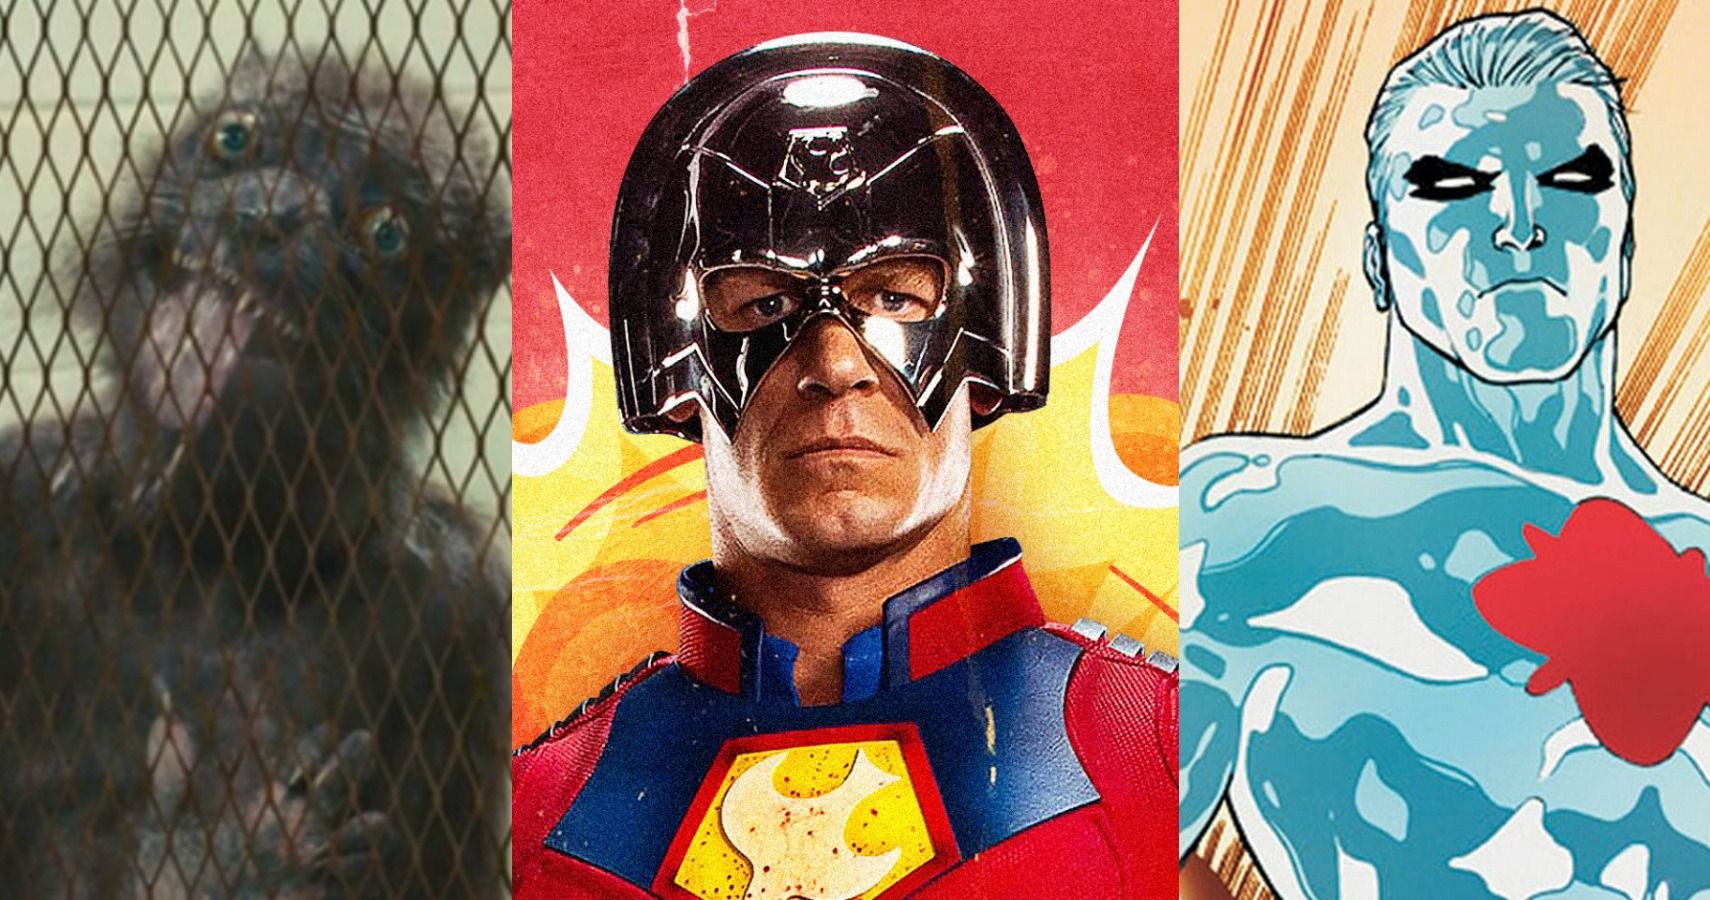 A combined image featuring an image of Sean Gunn's Weasel on the left, and image of John Cena's Peacemaker in the middle, and an image of the superhero Captain Atom on the right.